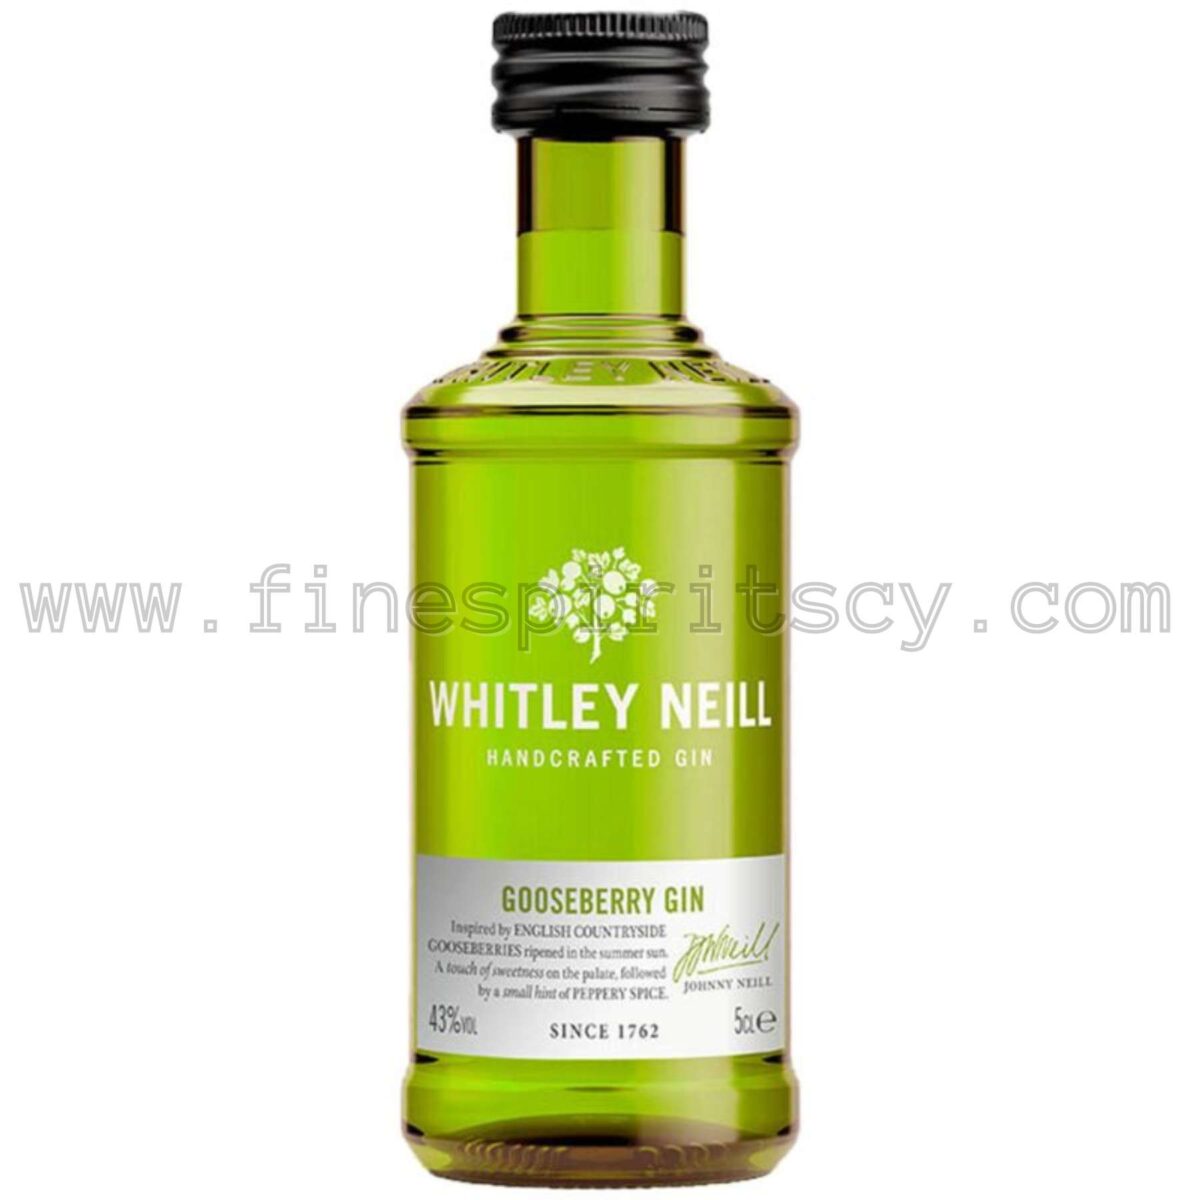 Whitley Neill Gooseberry Gin Cyprus Price Online Mini Miniature 50ml 5cl